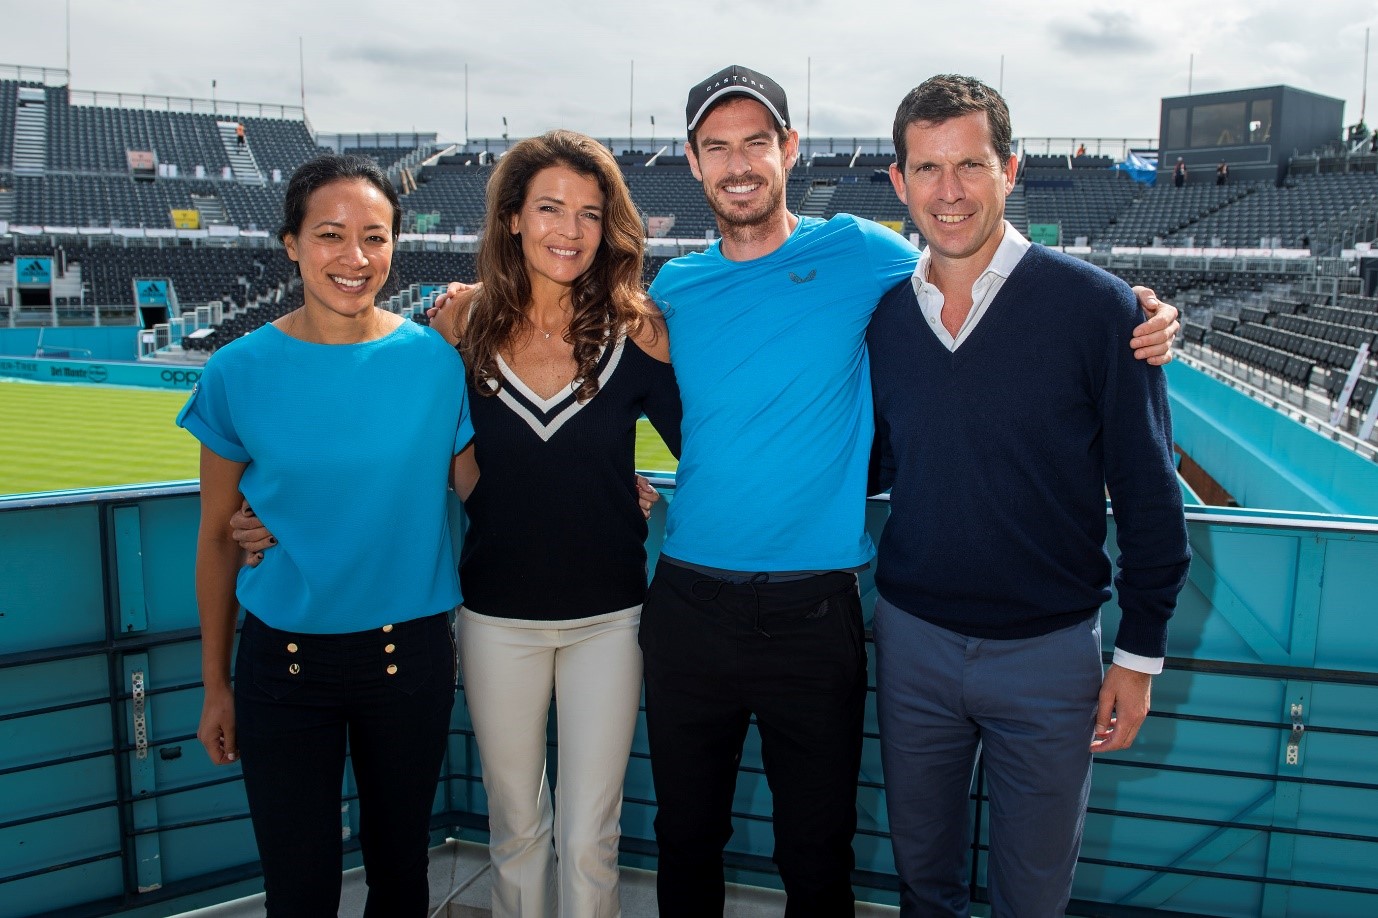 Amazon Prime Video partners with Andy Murray to support young tennis talent in the UK Amazon UK